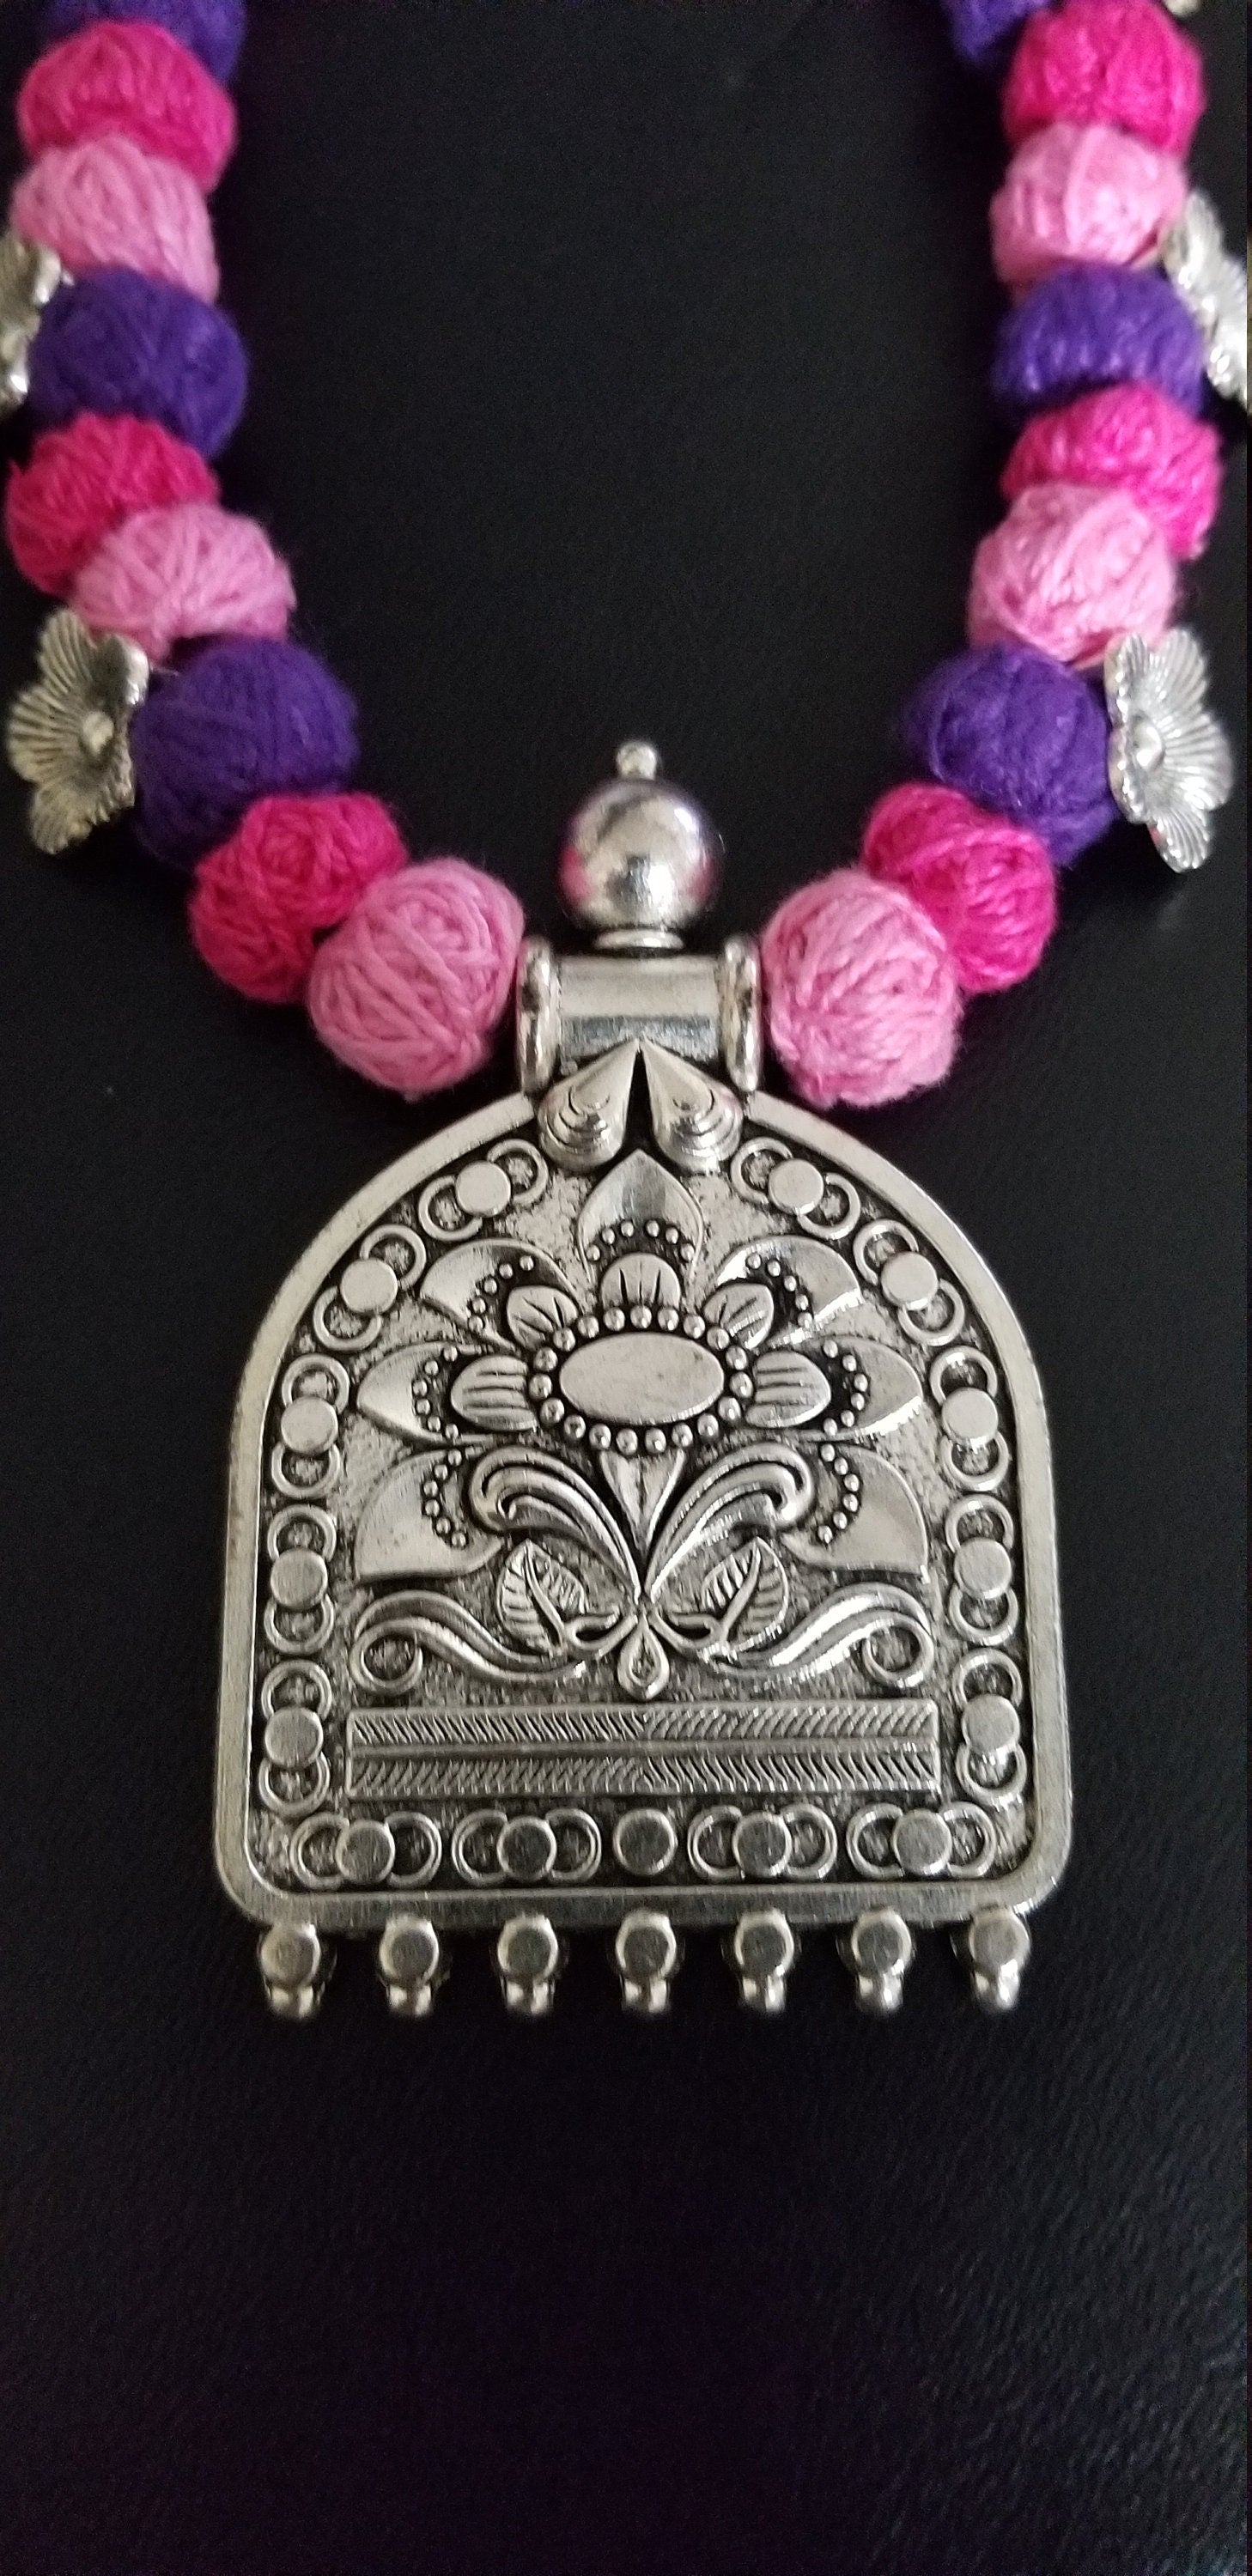 German silver pendant with multi color thread beads